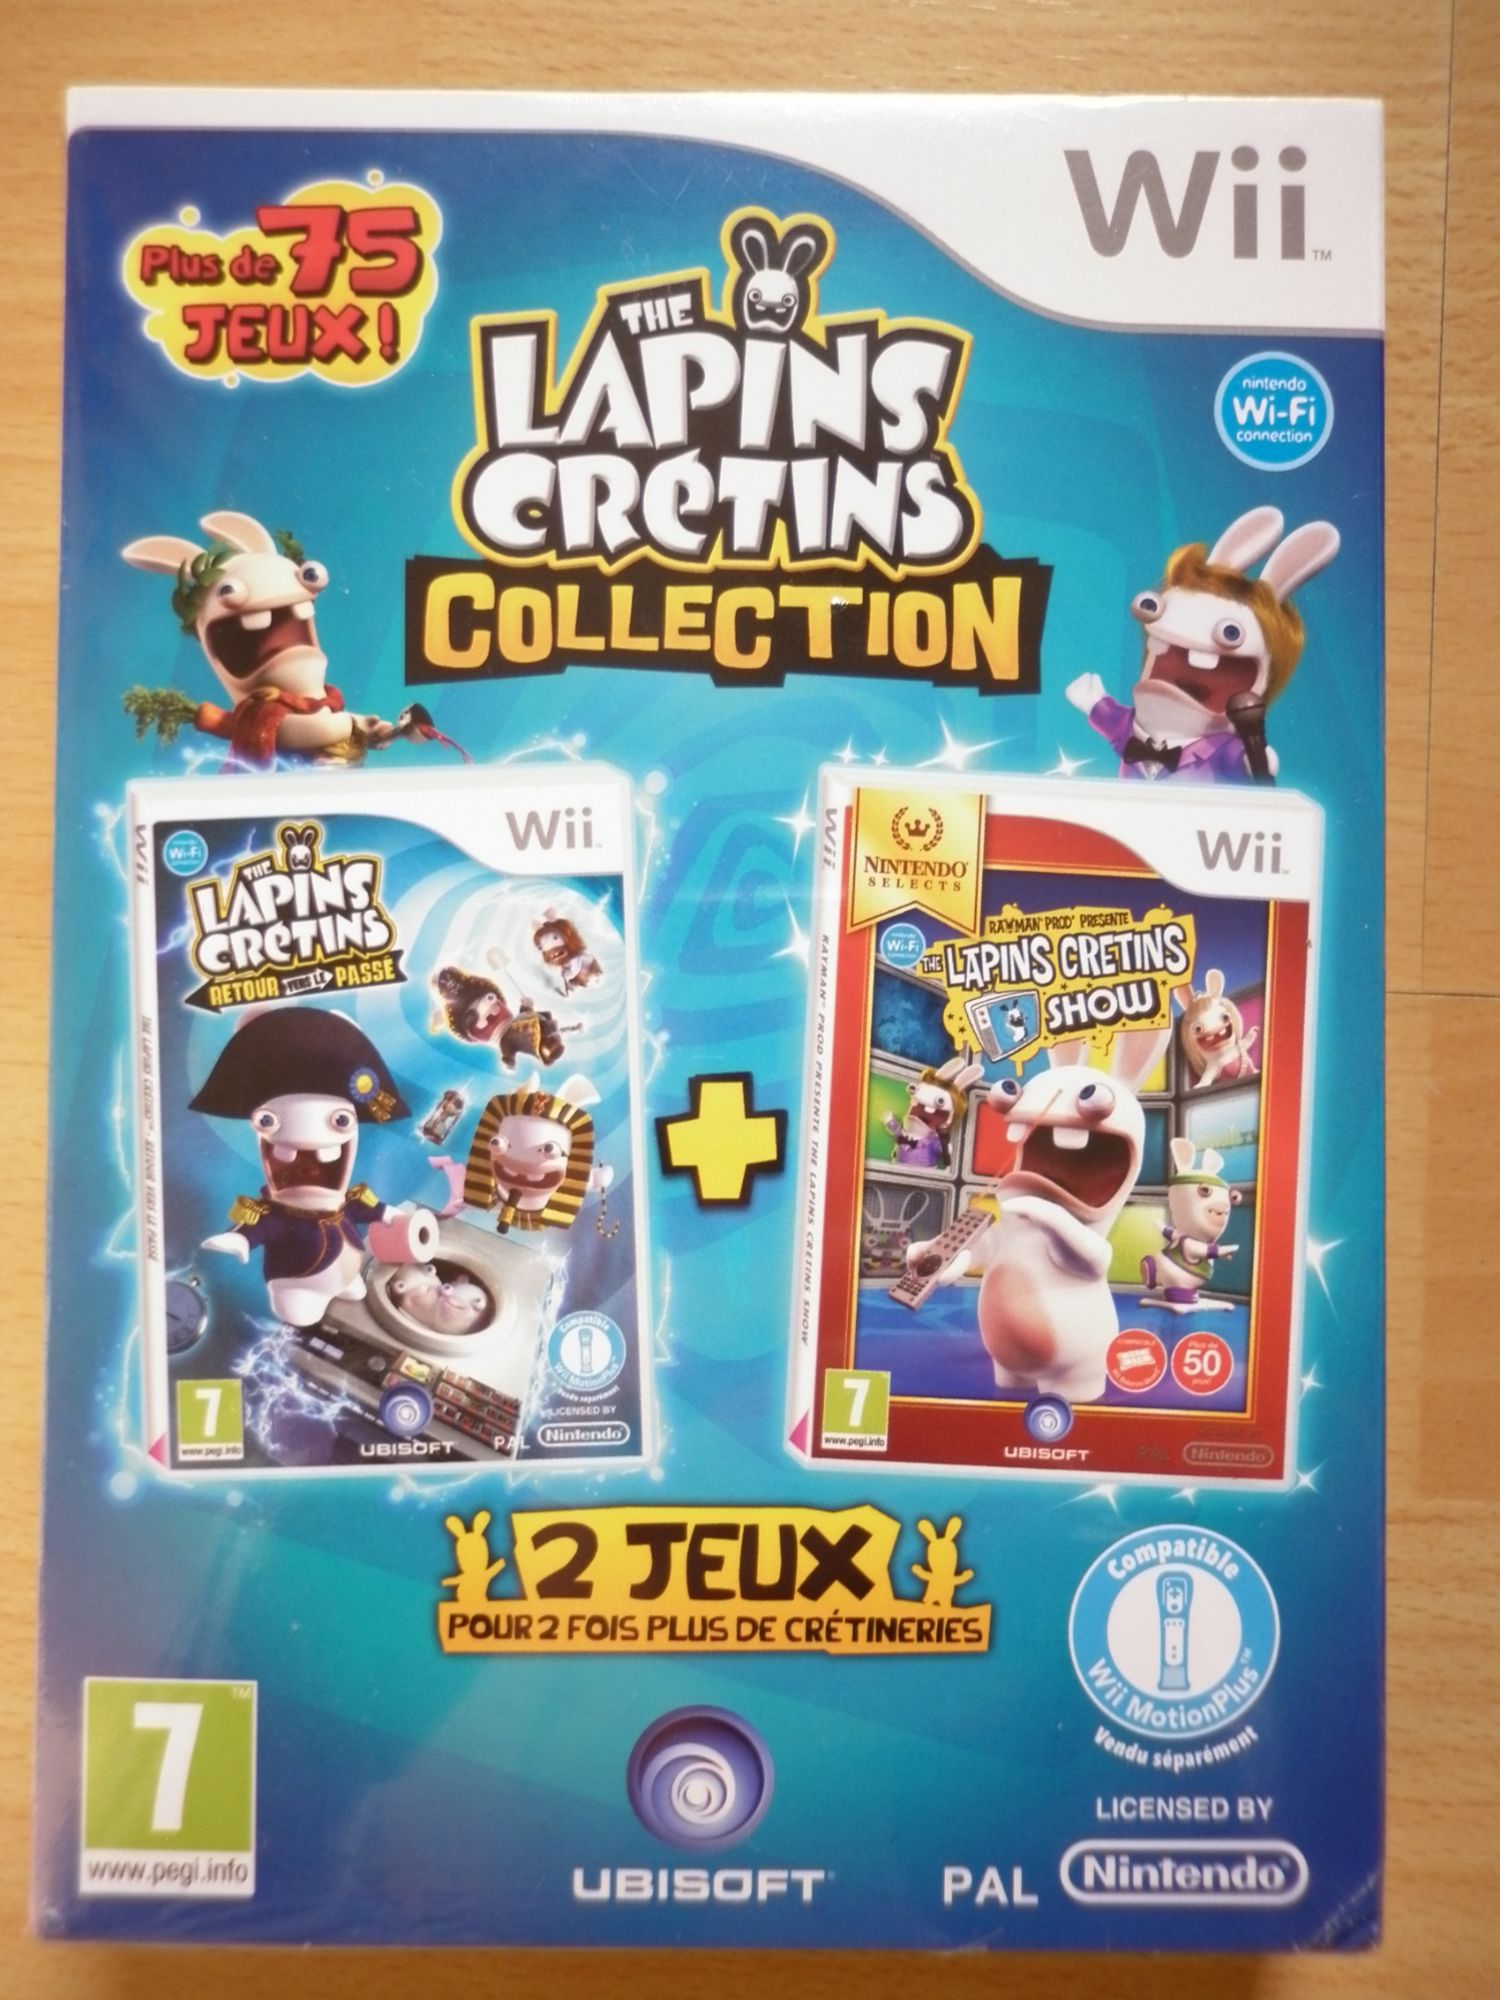 The Lapins Crétins Collection